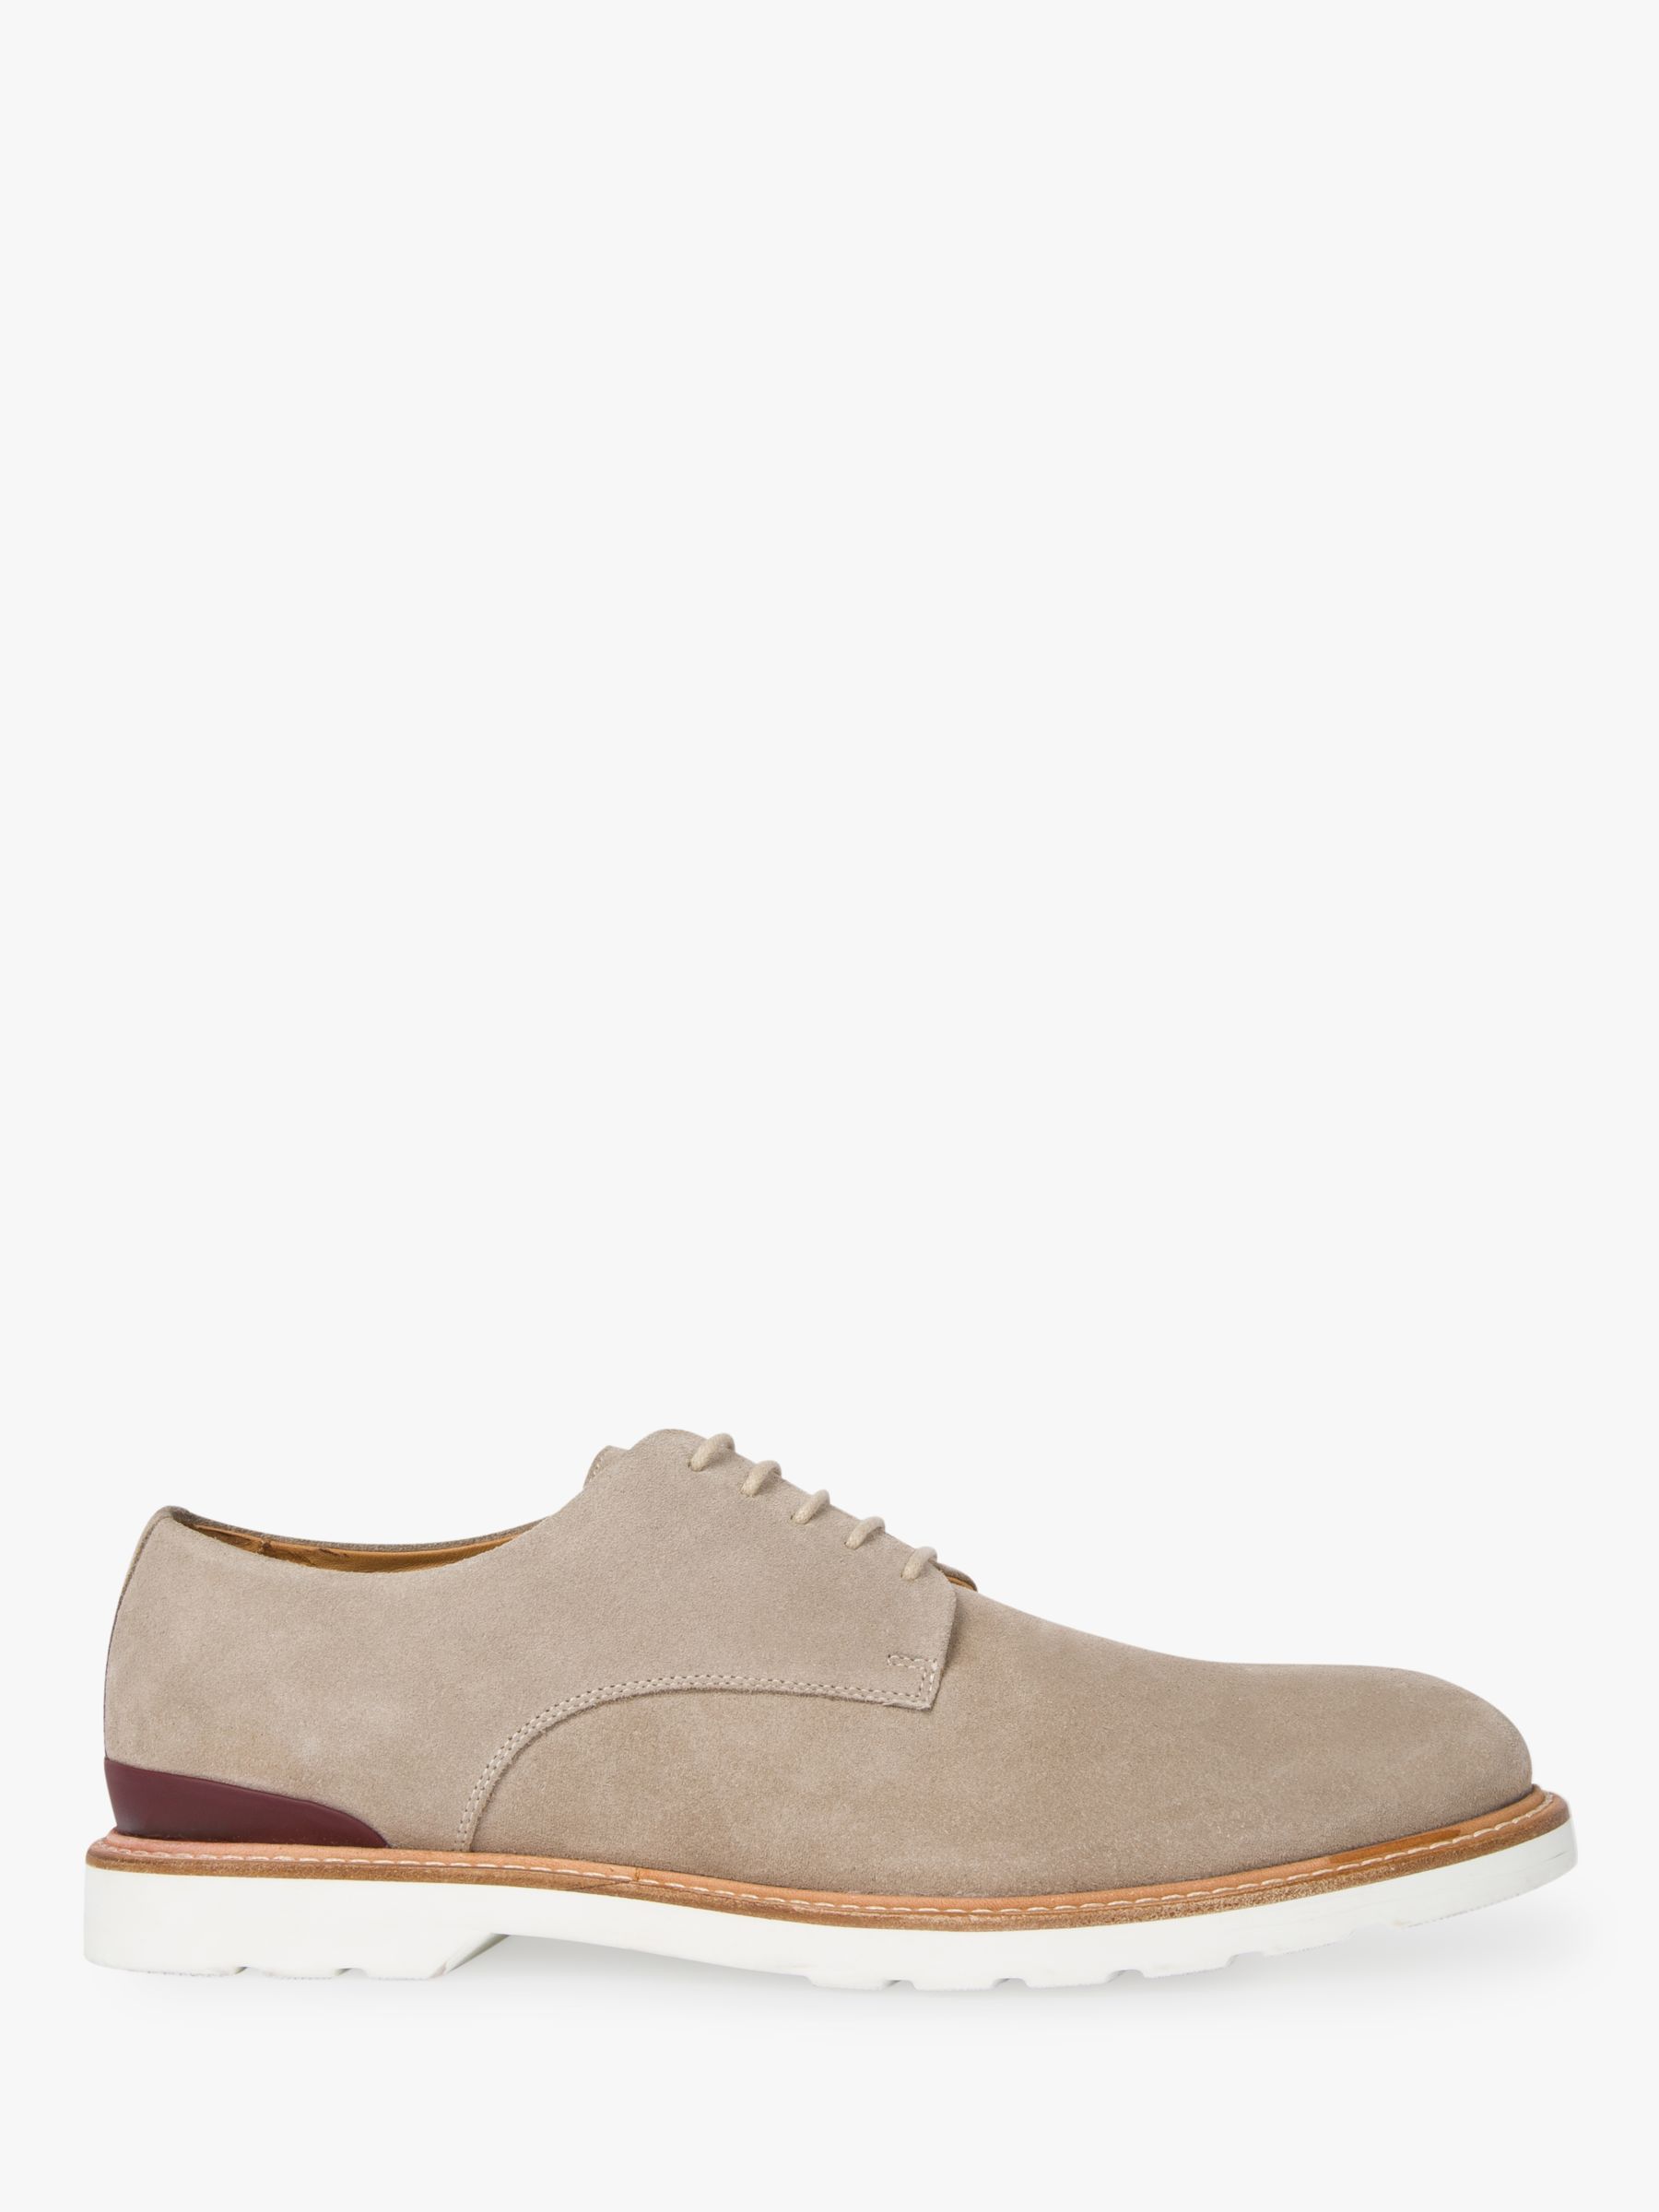 paul smith suede shoes